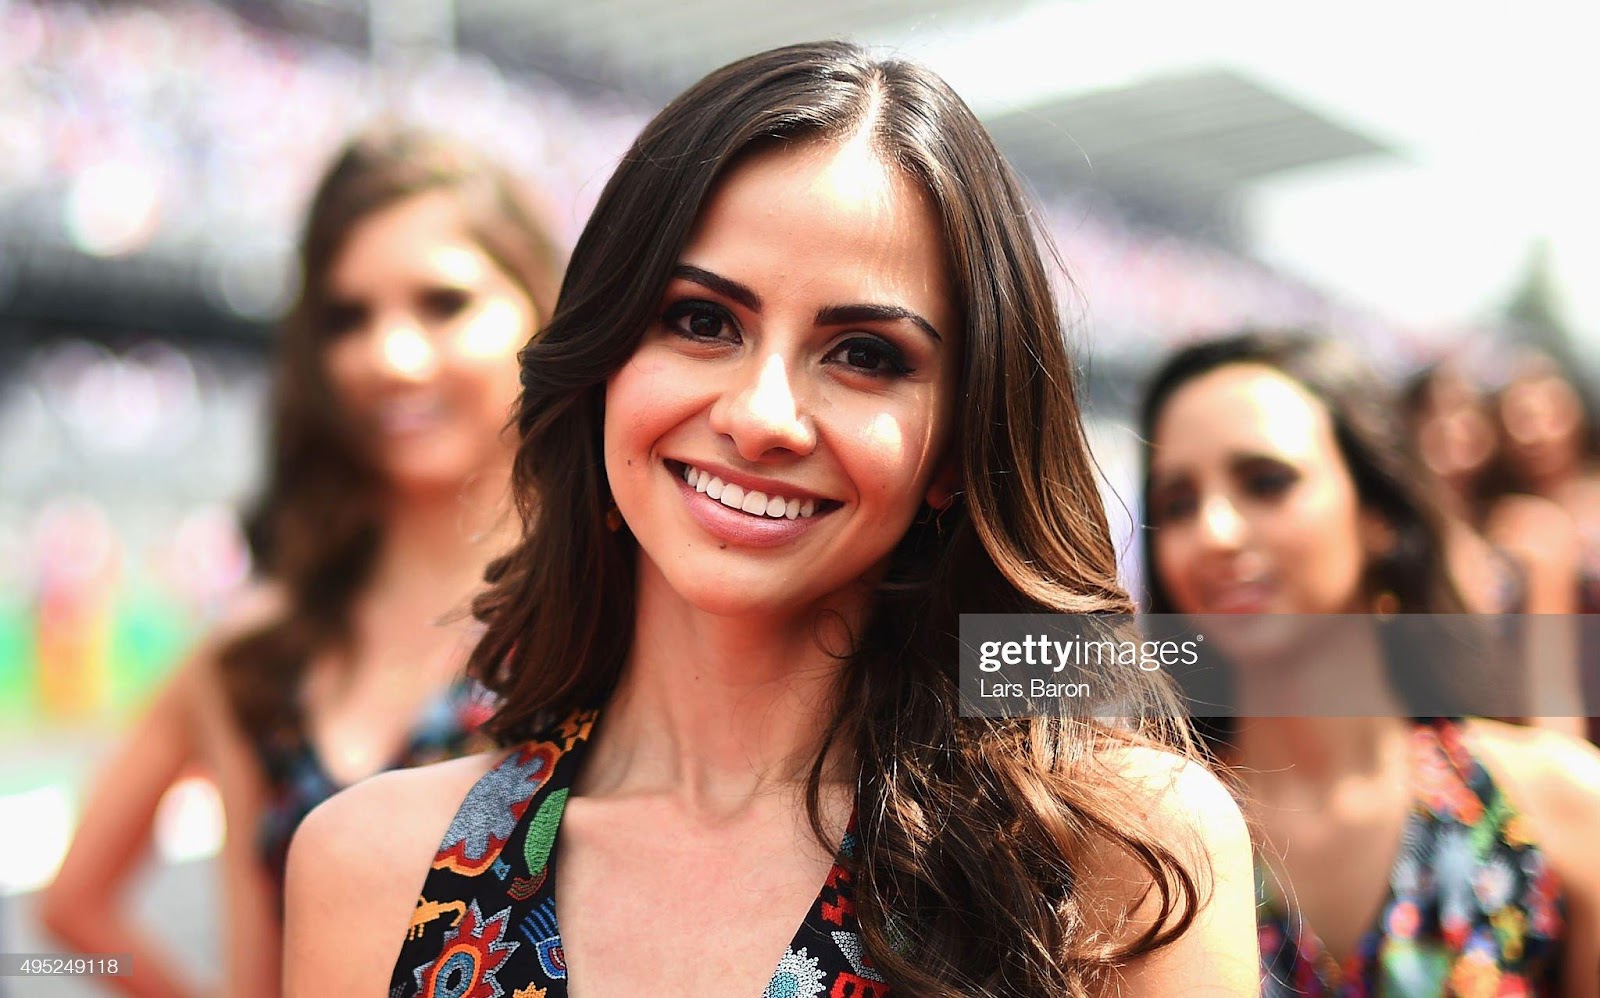 D:\Documenti\posts\posts\Women and motorsport\foto\Getty e altre\grid-girls-pose-during-the-drivers-parade-ahead-of-the-formula-one-picture-id495249118.jpg